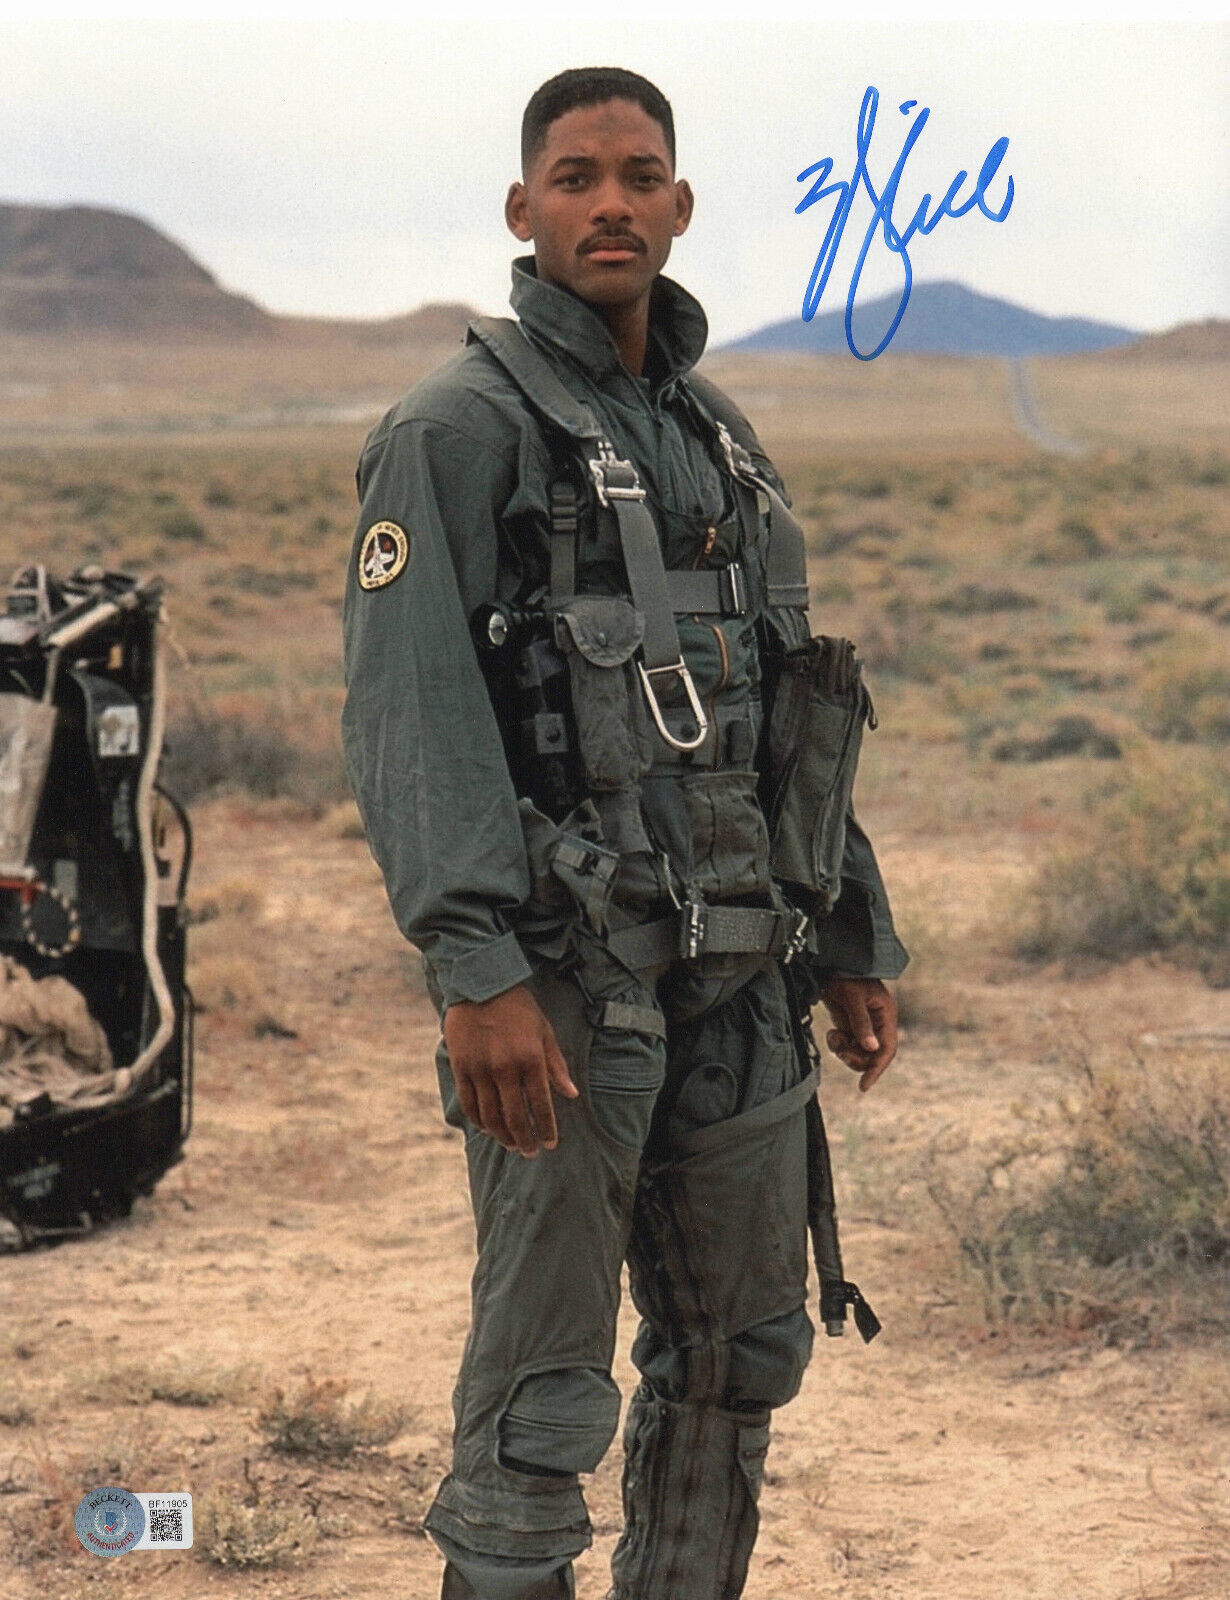 WILL SMITH SIGNED AUTO INDEPENDENCE DAY 11X14 PHOTO AUTHENTIC BECKETT BAS COA 